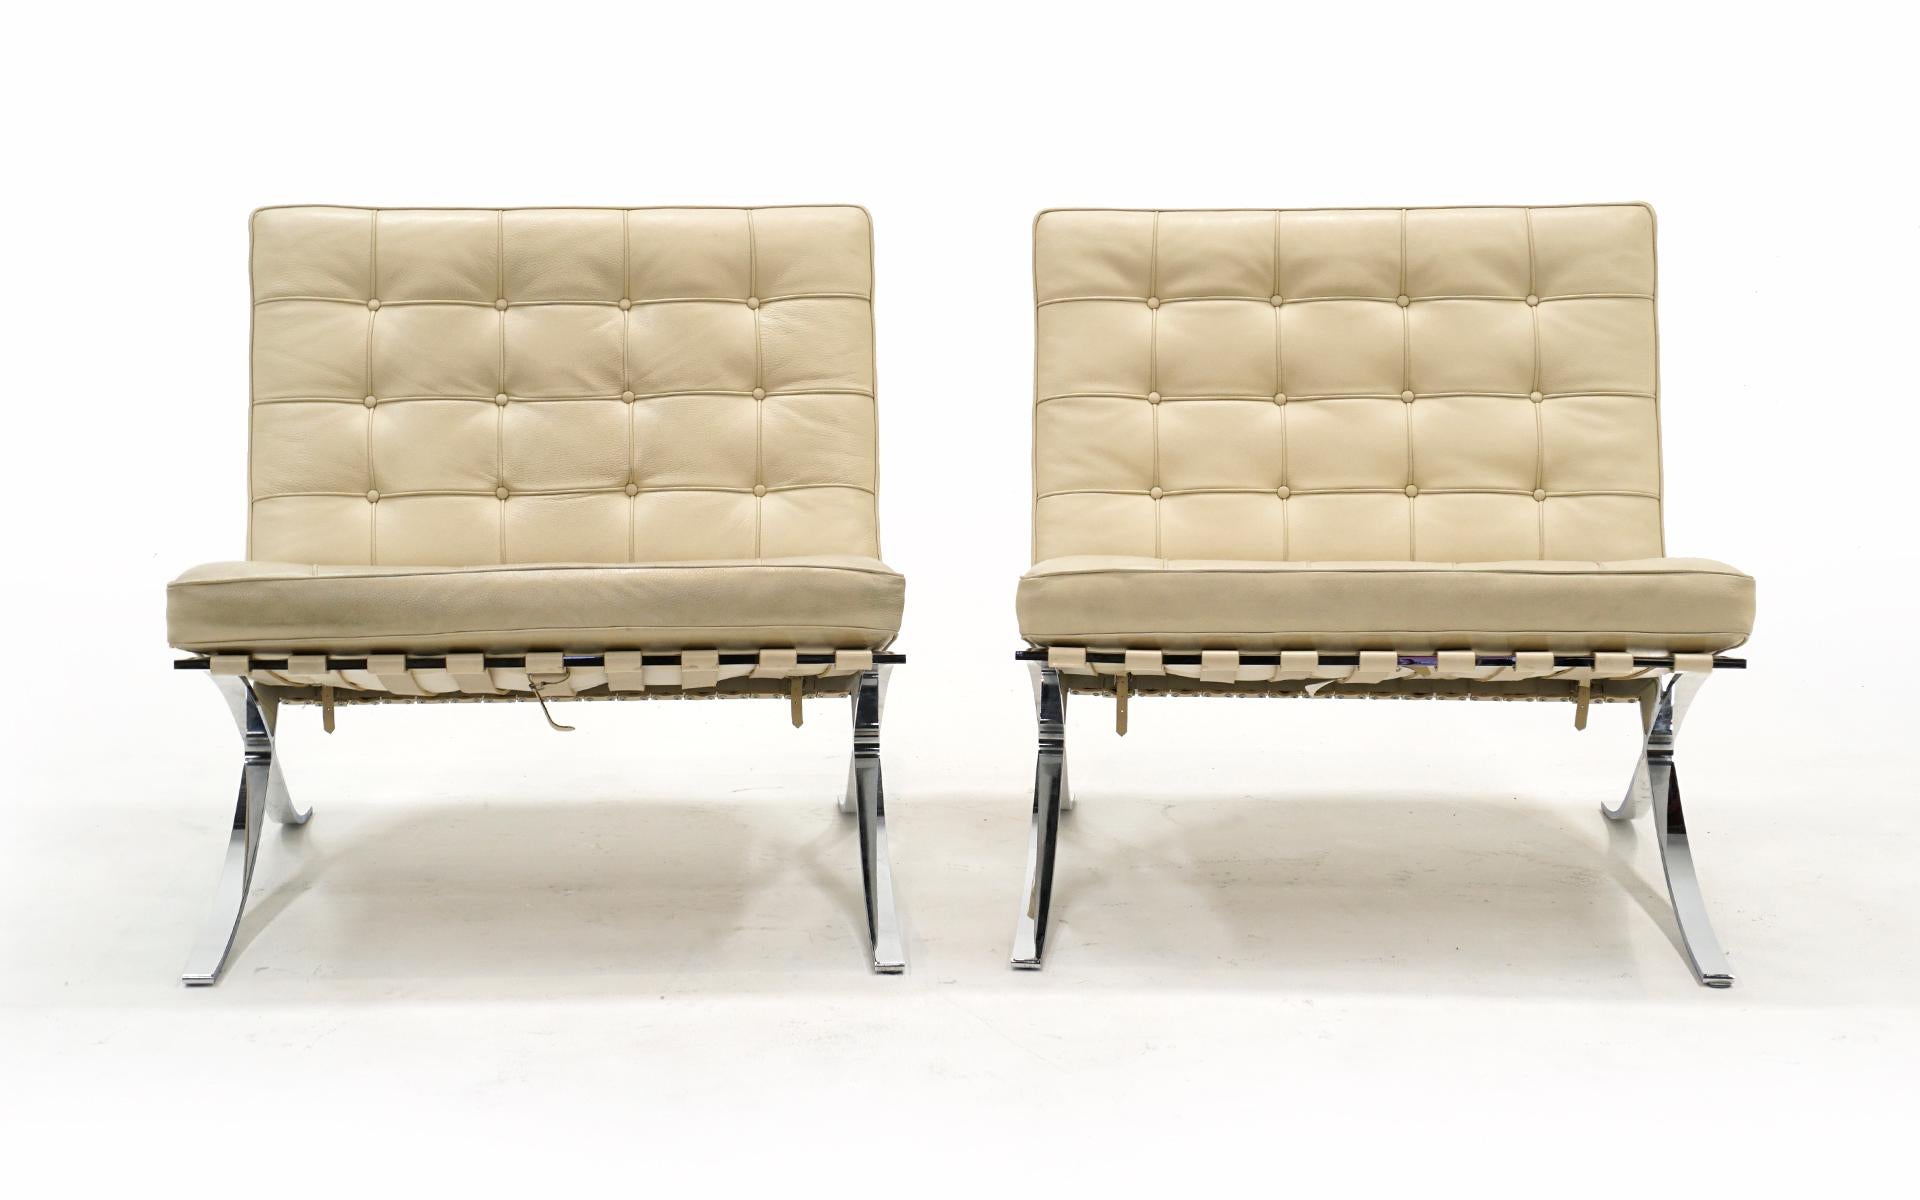 Pair of off white / ivory leather Barcelona Chairs designed by Ludwig Mies van der Rohe for Knoll. This pair is in the original leather in very good condition. No holes, tears or repairs. The chromed steel frames have scattered light scratches buy